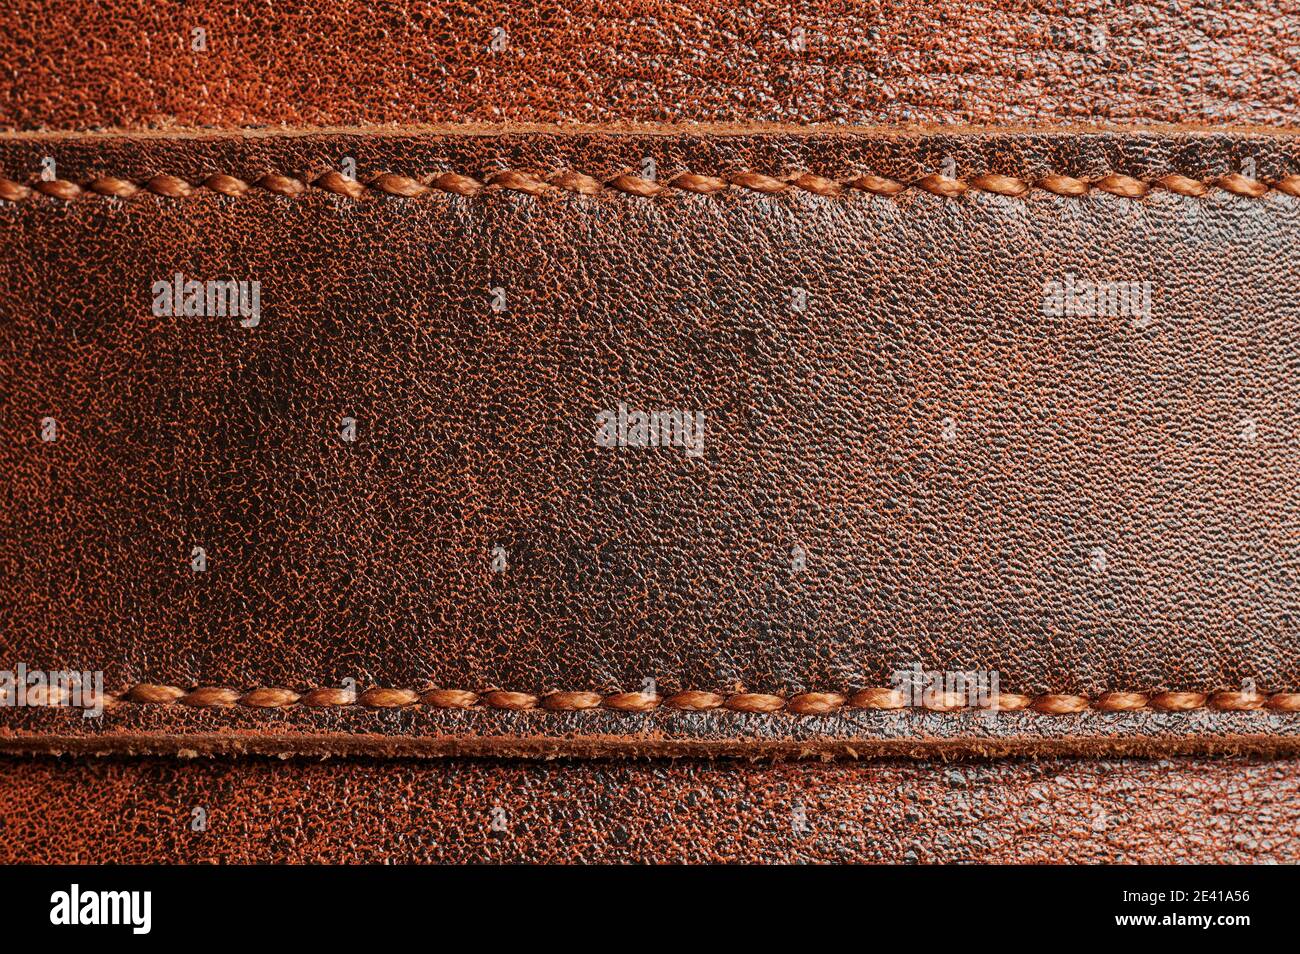 Brown leather tag with stitches macro close up view Stock Photo